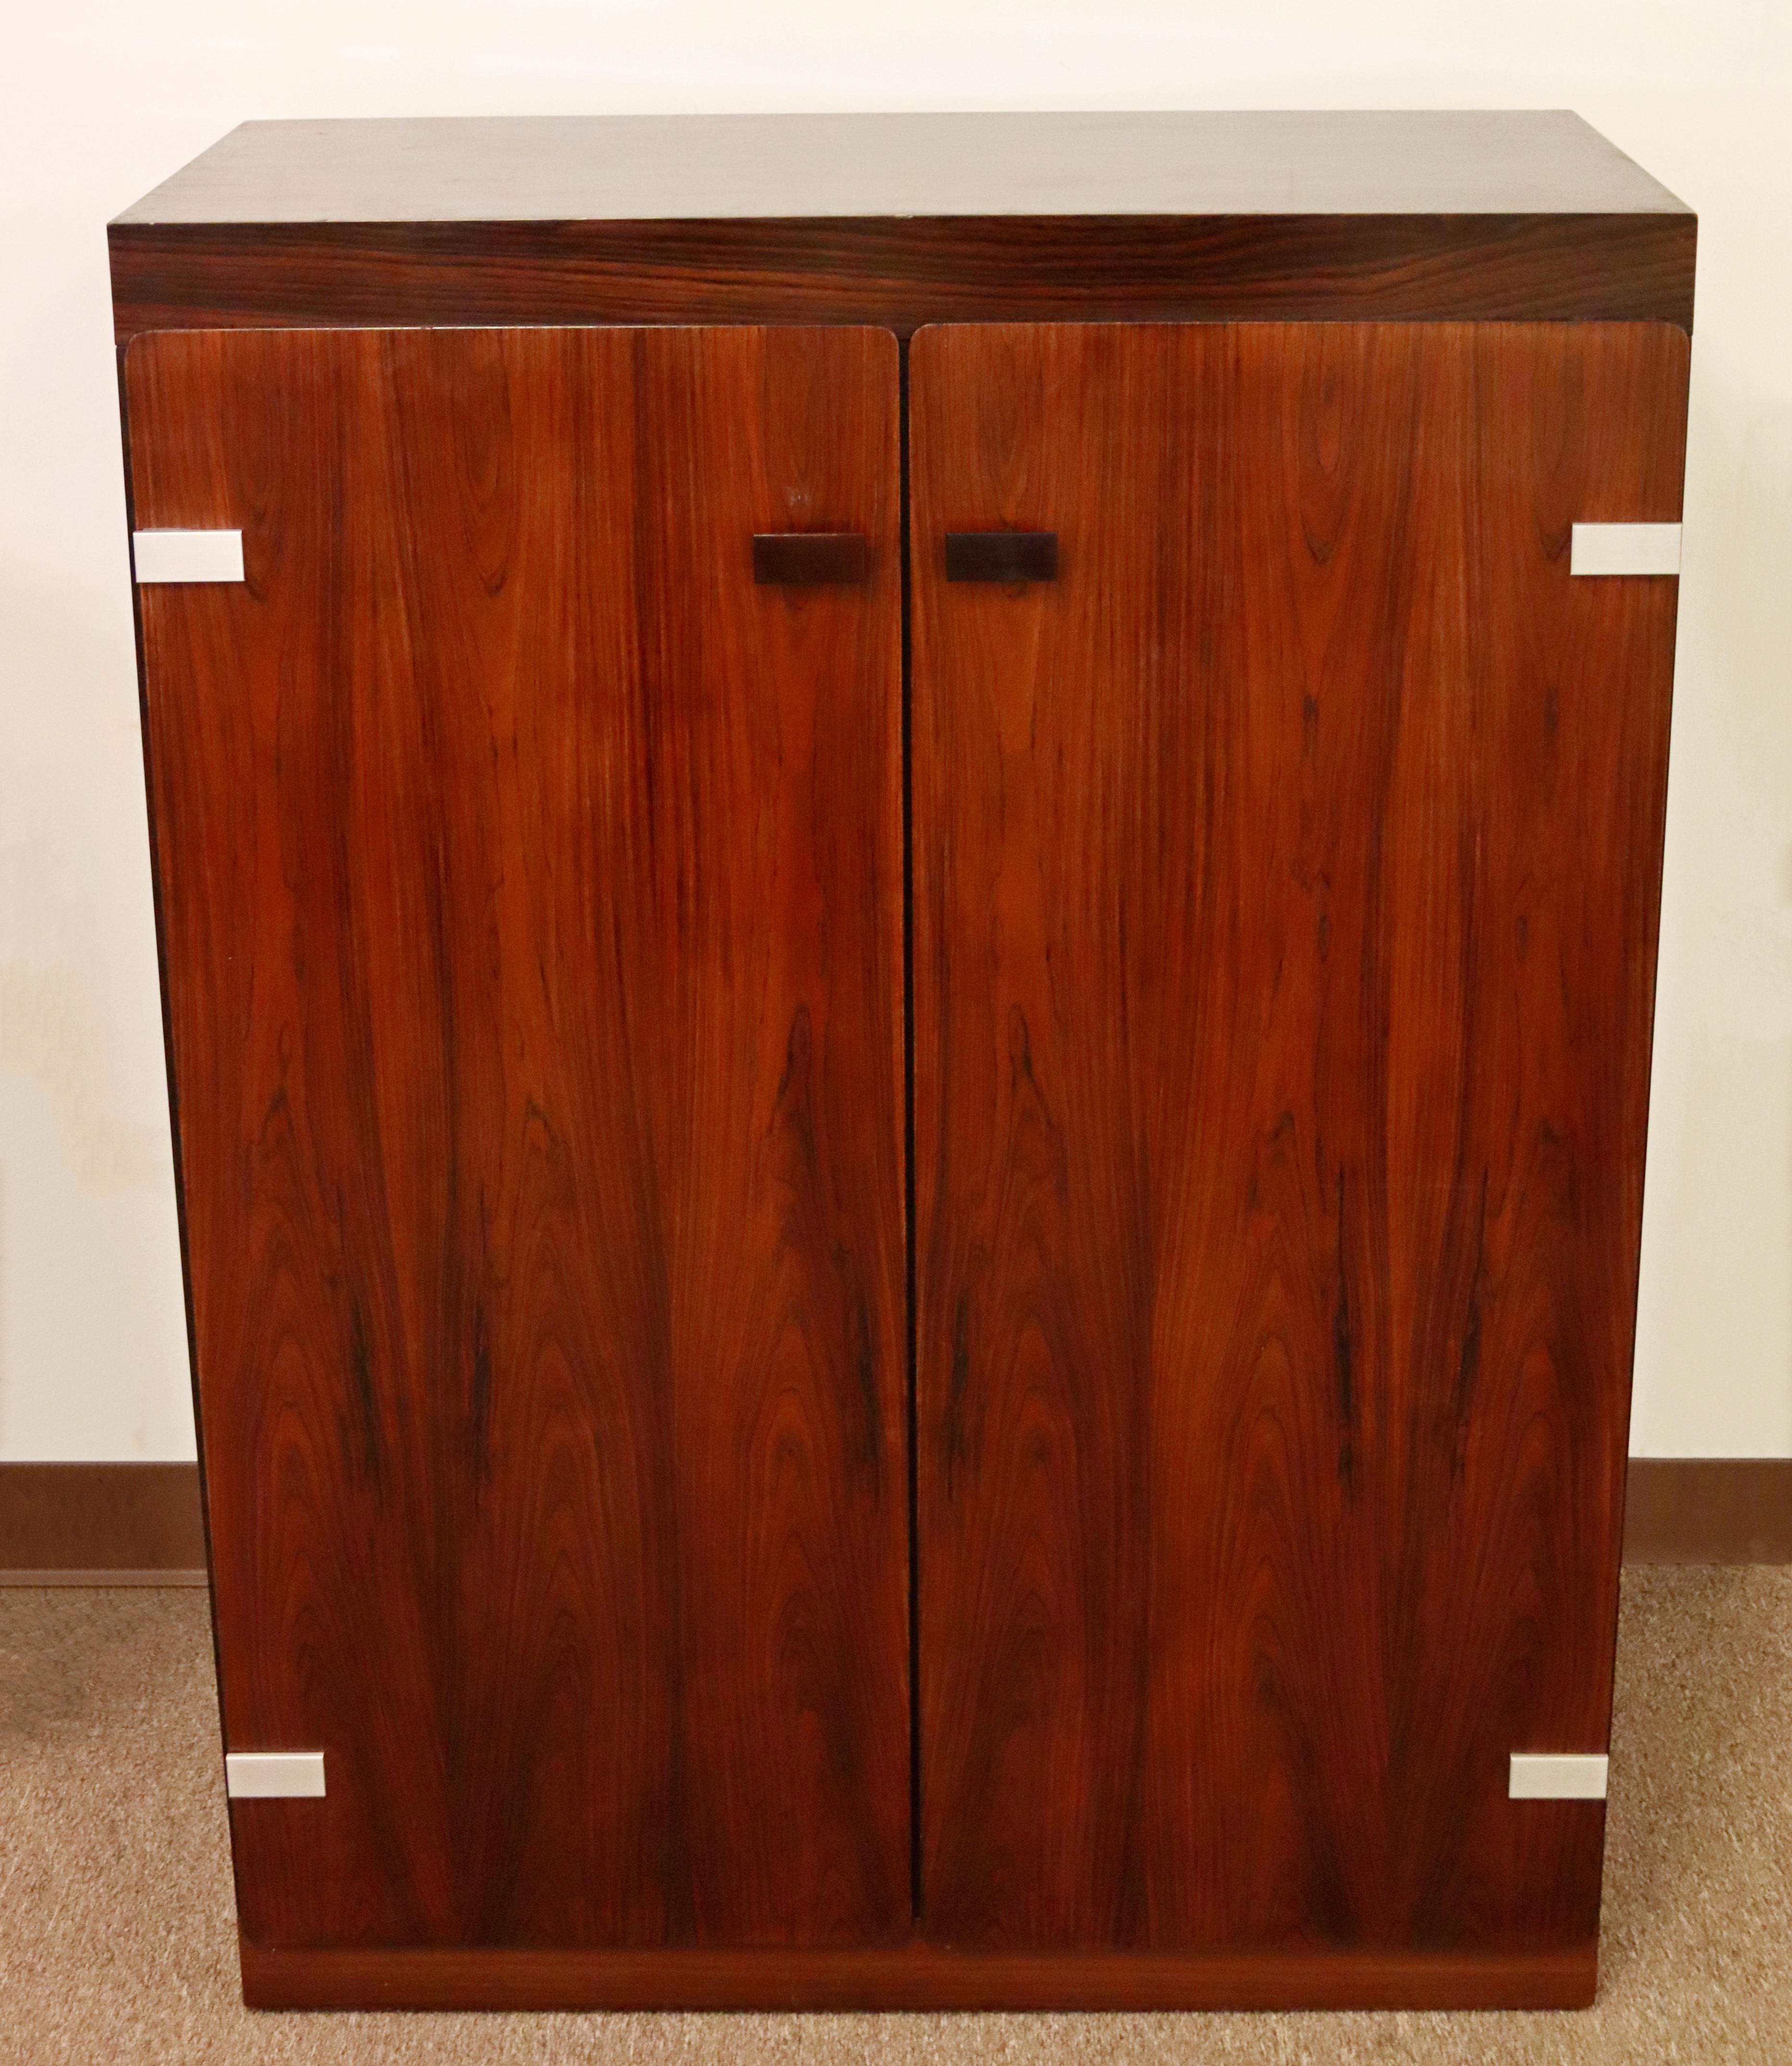 For your consideration is a superb, rosewood bar cabinet, with three shelves and six shelves, by Mobler, made in Denmark, circa the 1960s. In excellent vintage condition. The dimensions are 33.5